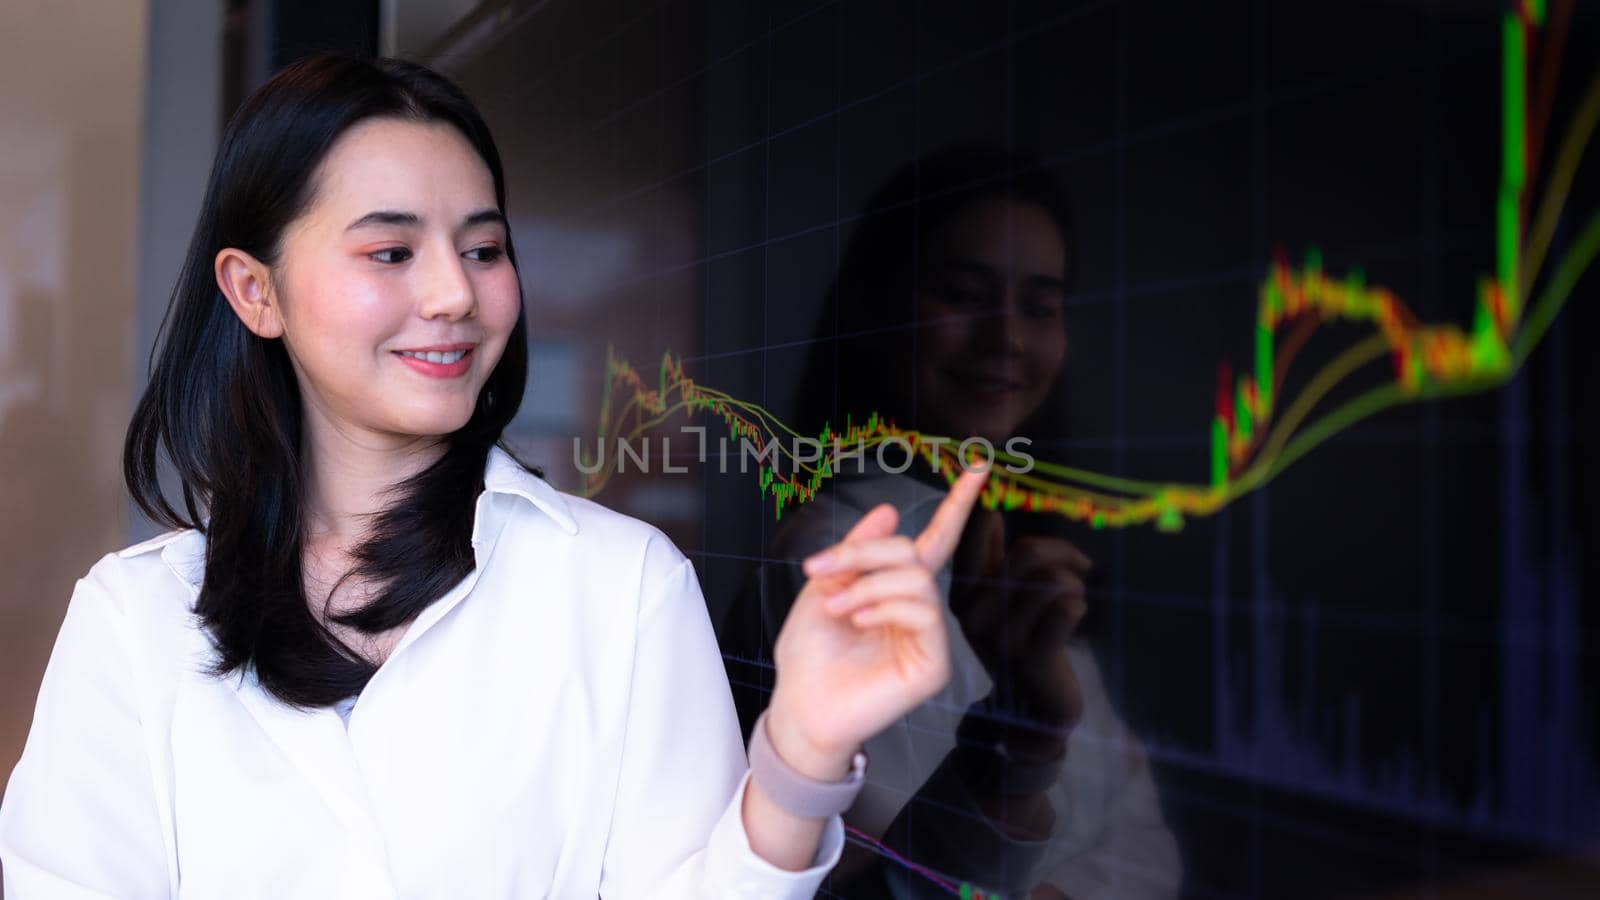 Businesswoman pointing chart financial market trader. Concept of stock market, cryptocurrency.